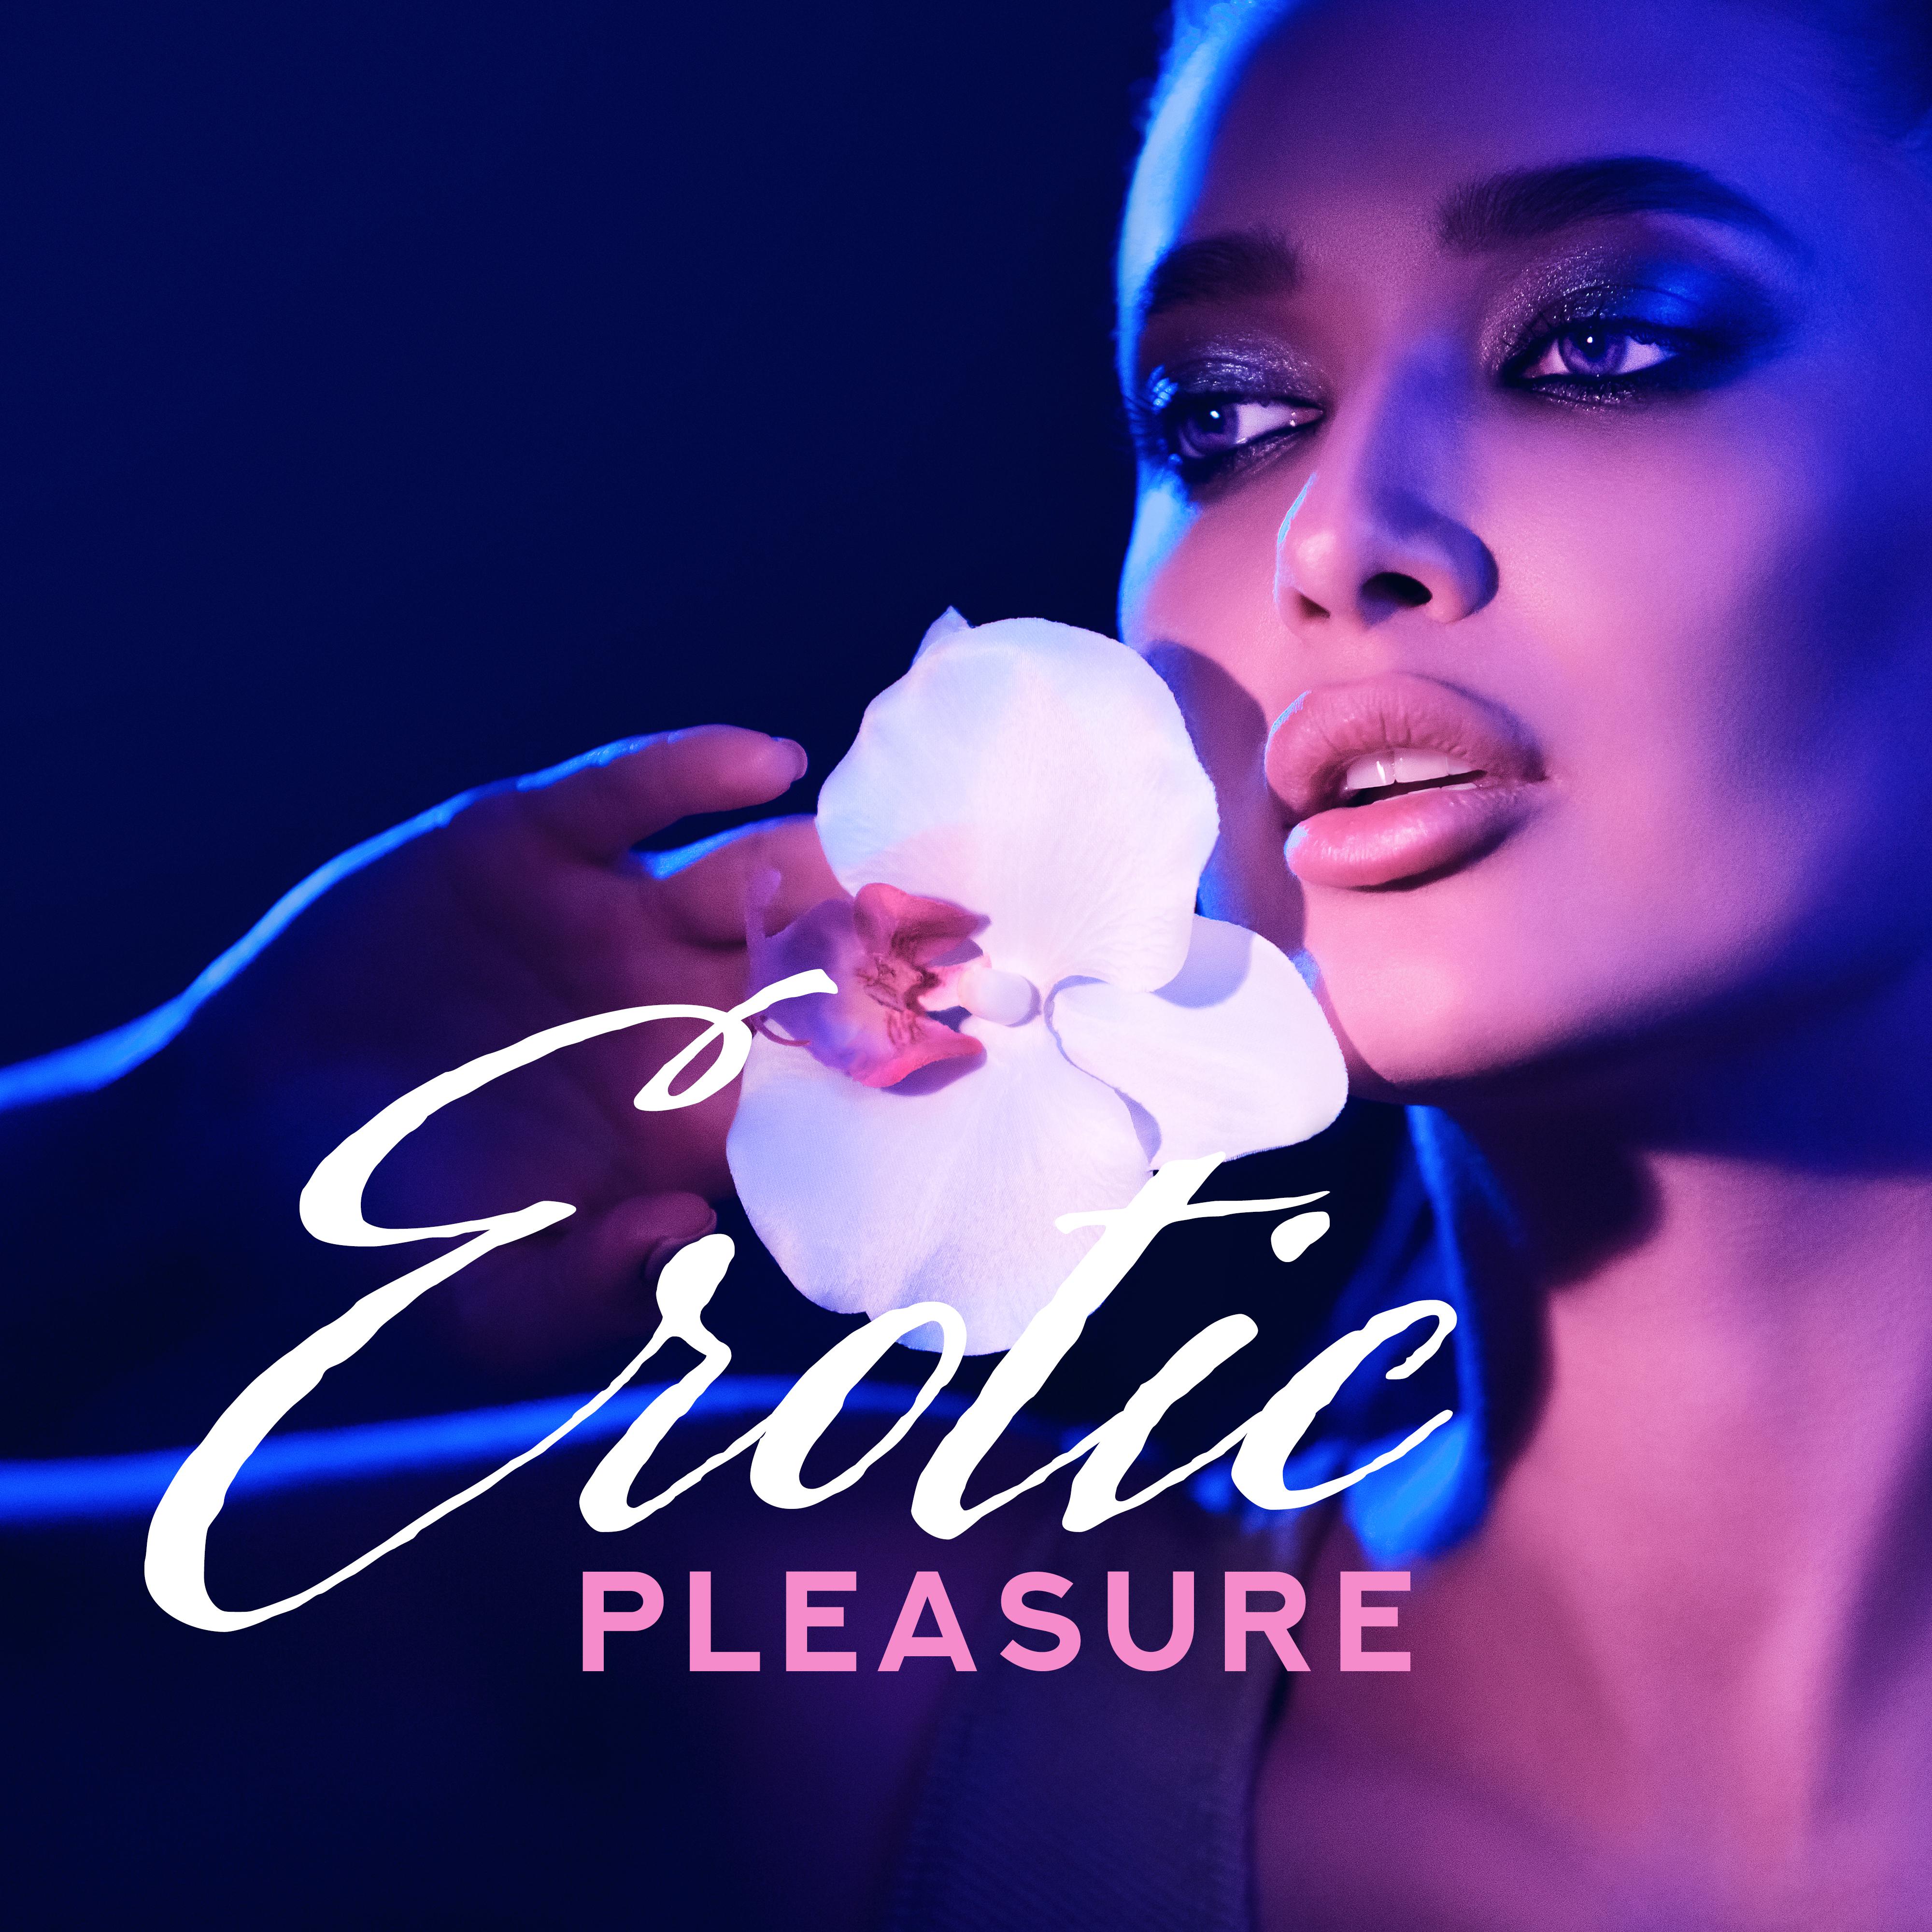 Erotic Pleasure: *** Music Zone, Deep Vibes, Relaxing Music for Making Love, Tantric Music, Chillout 2019